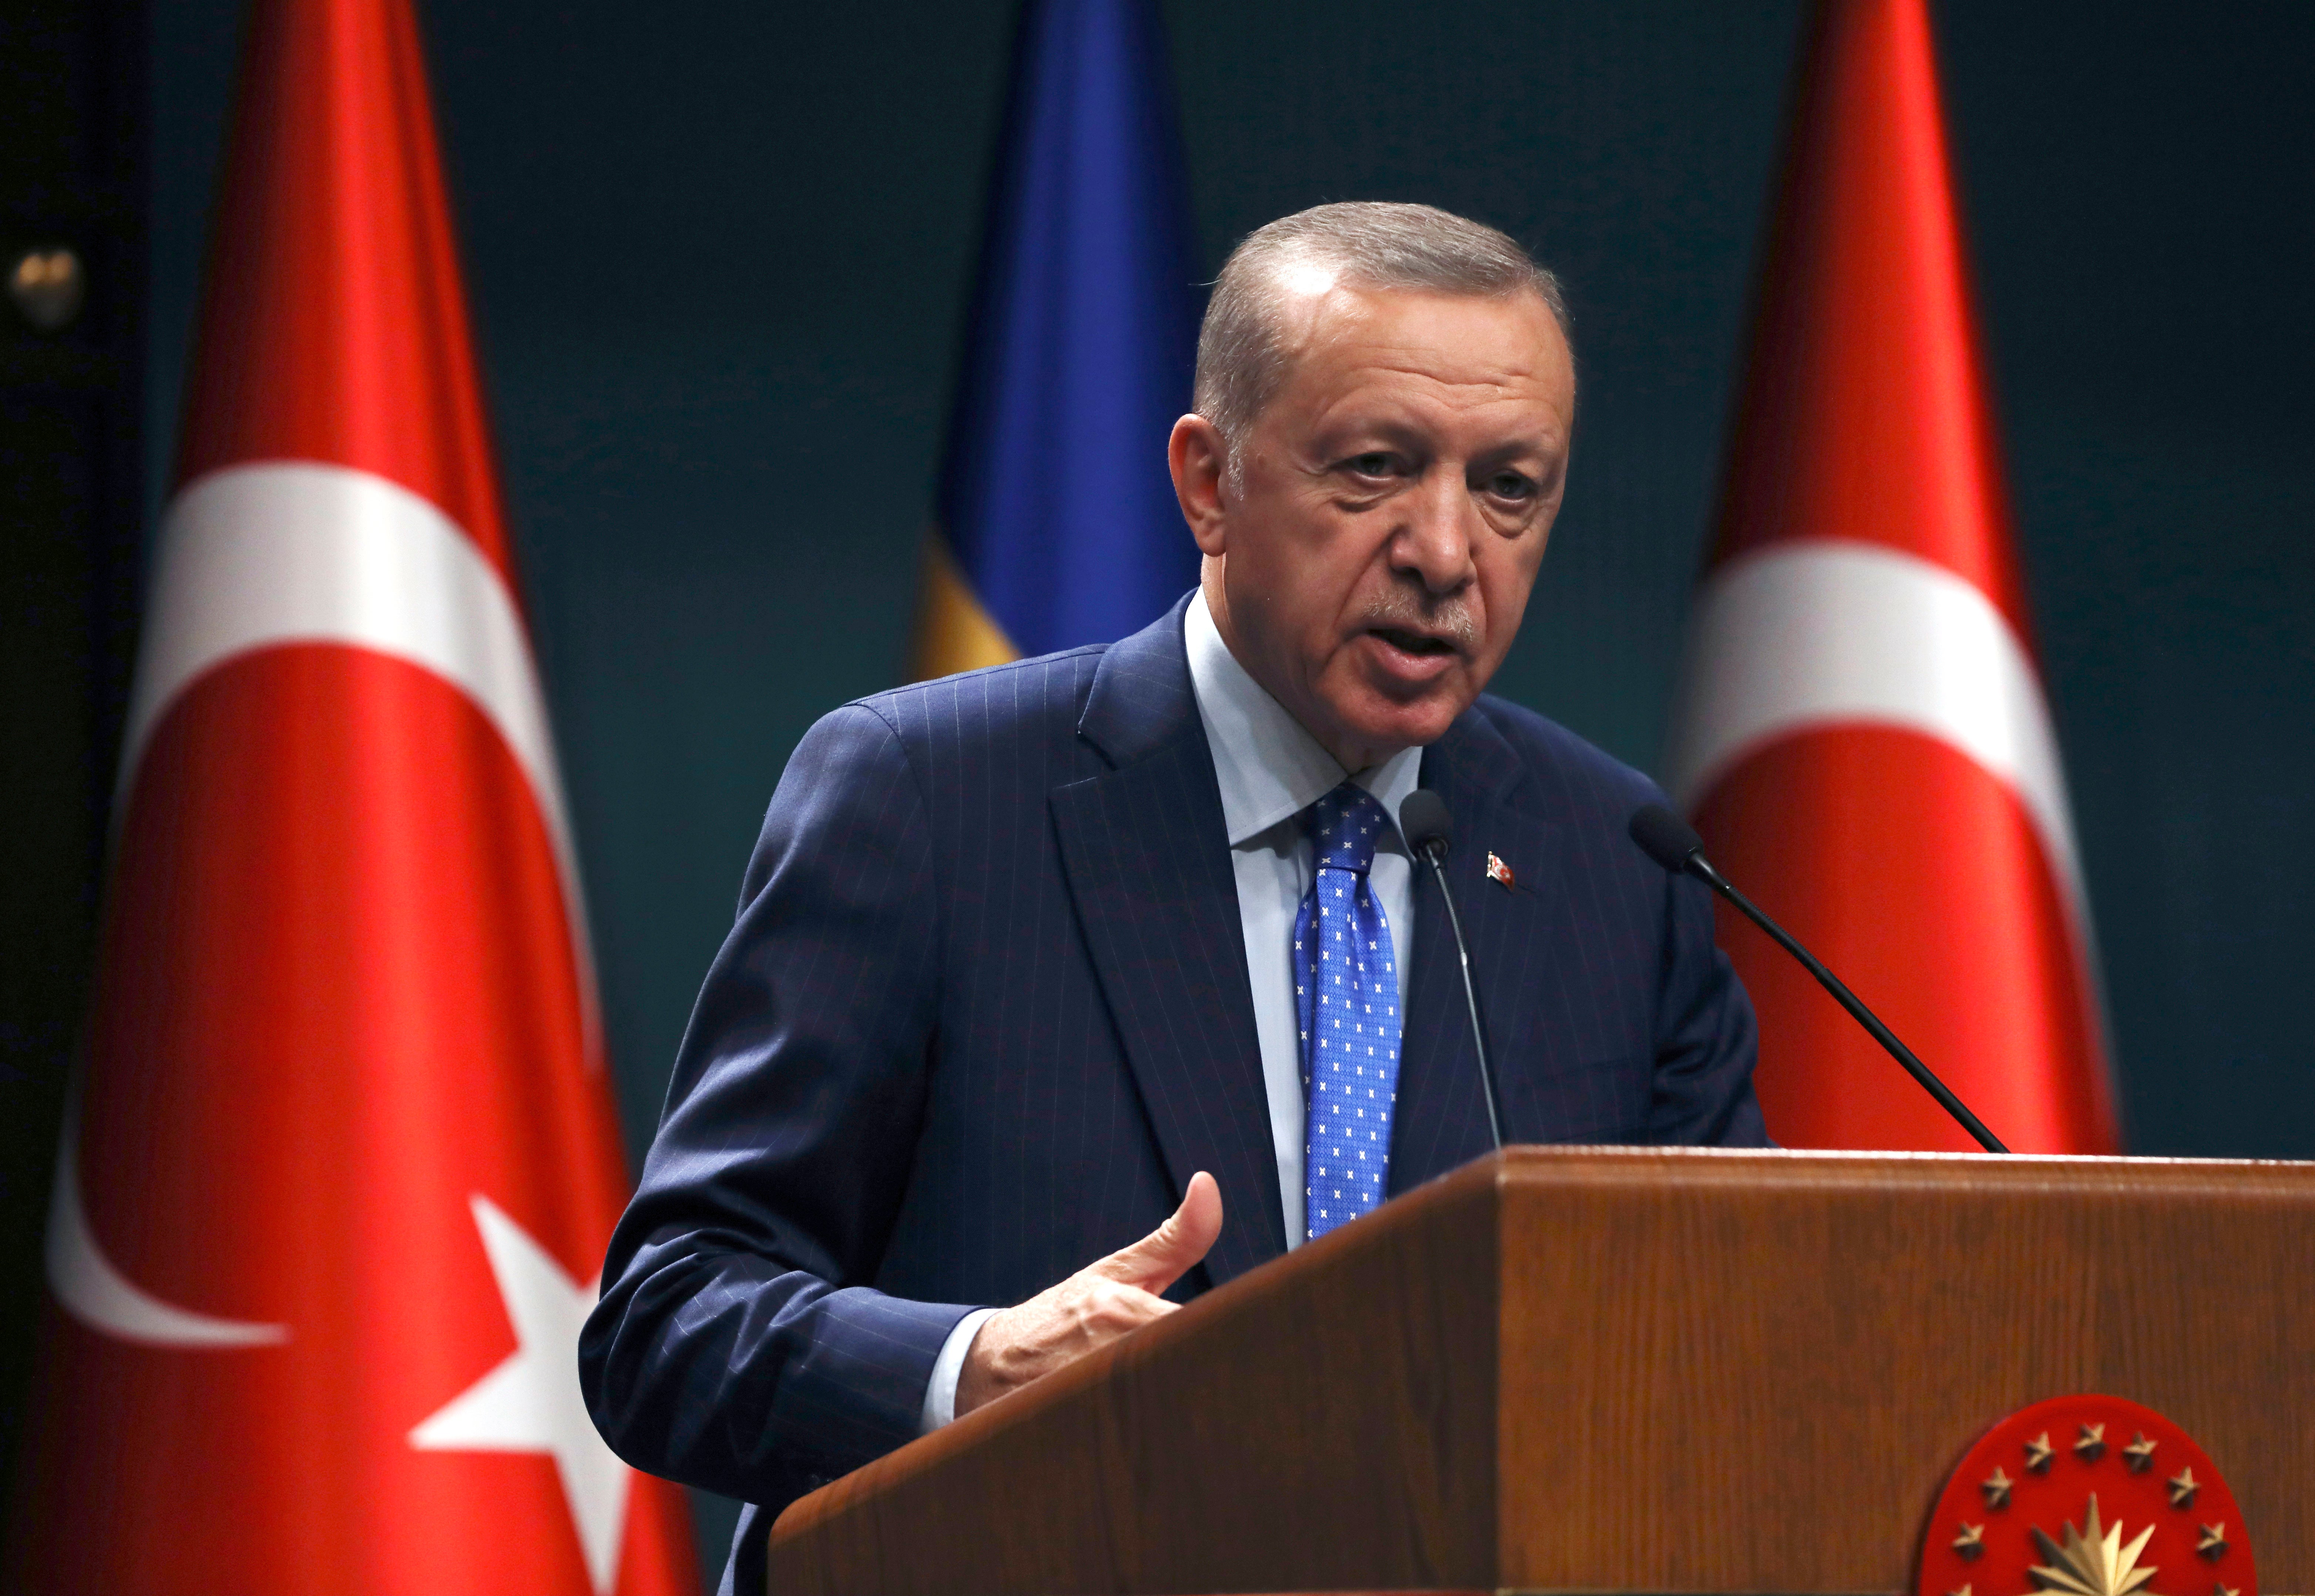 Turkey’s president Recep Tayyip Erdogan says the rally in Stockholm is an insult to Islam